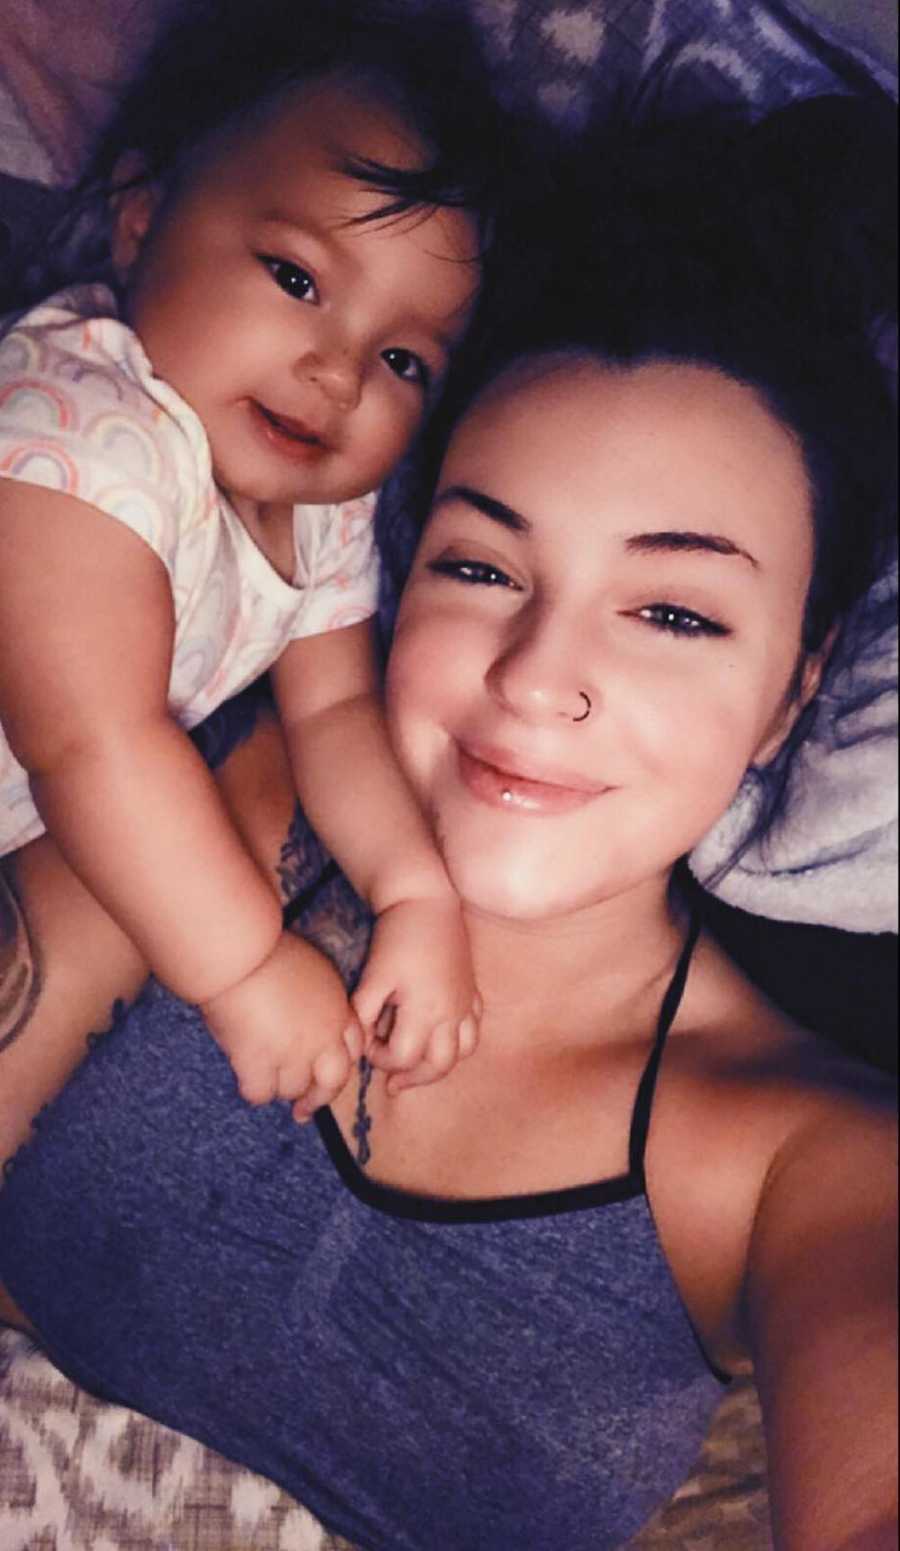 Woman who was raped smiles in selfie with infant daughter